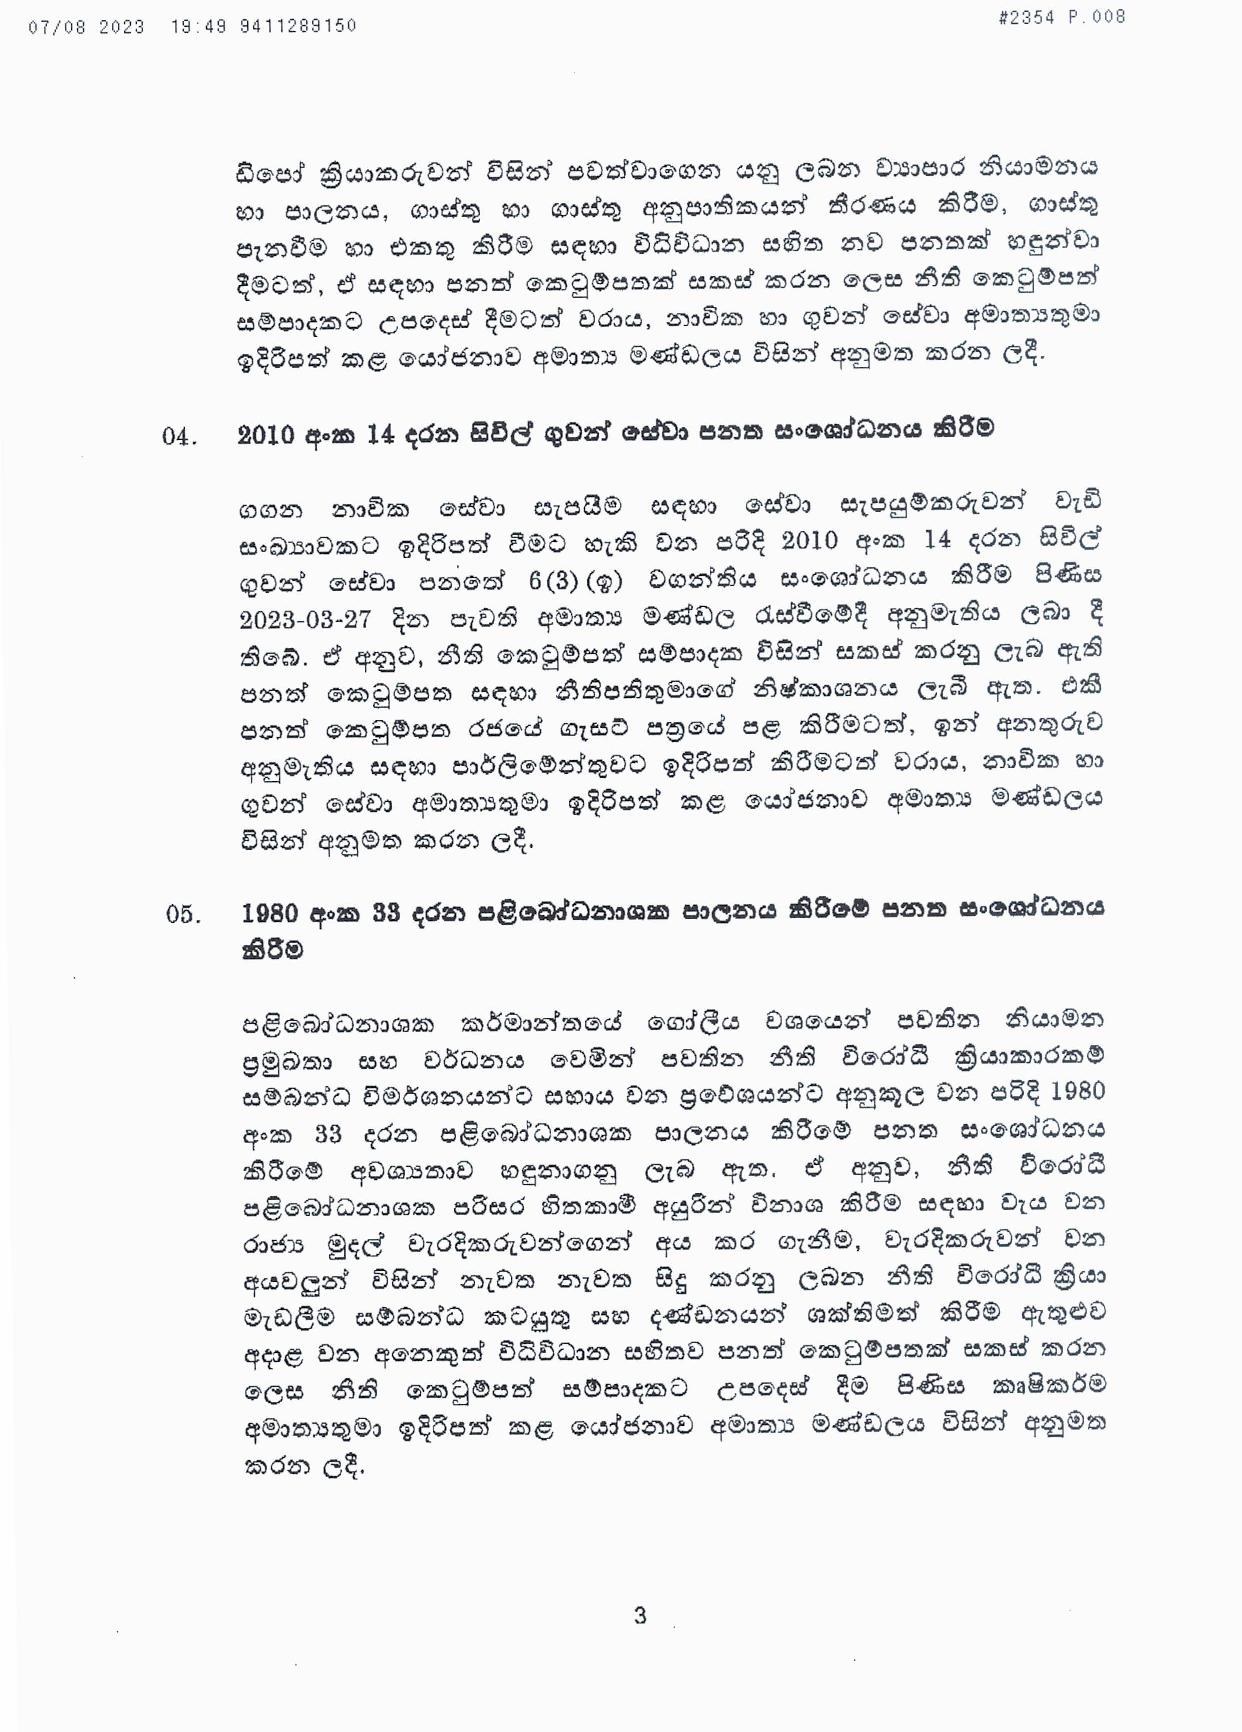 Cabinet Decision on 07.08.2023 page 003